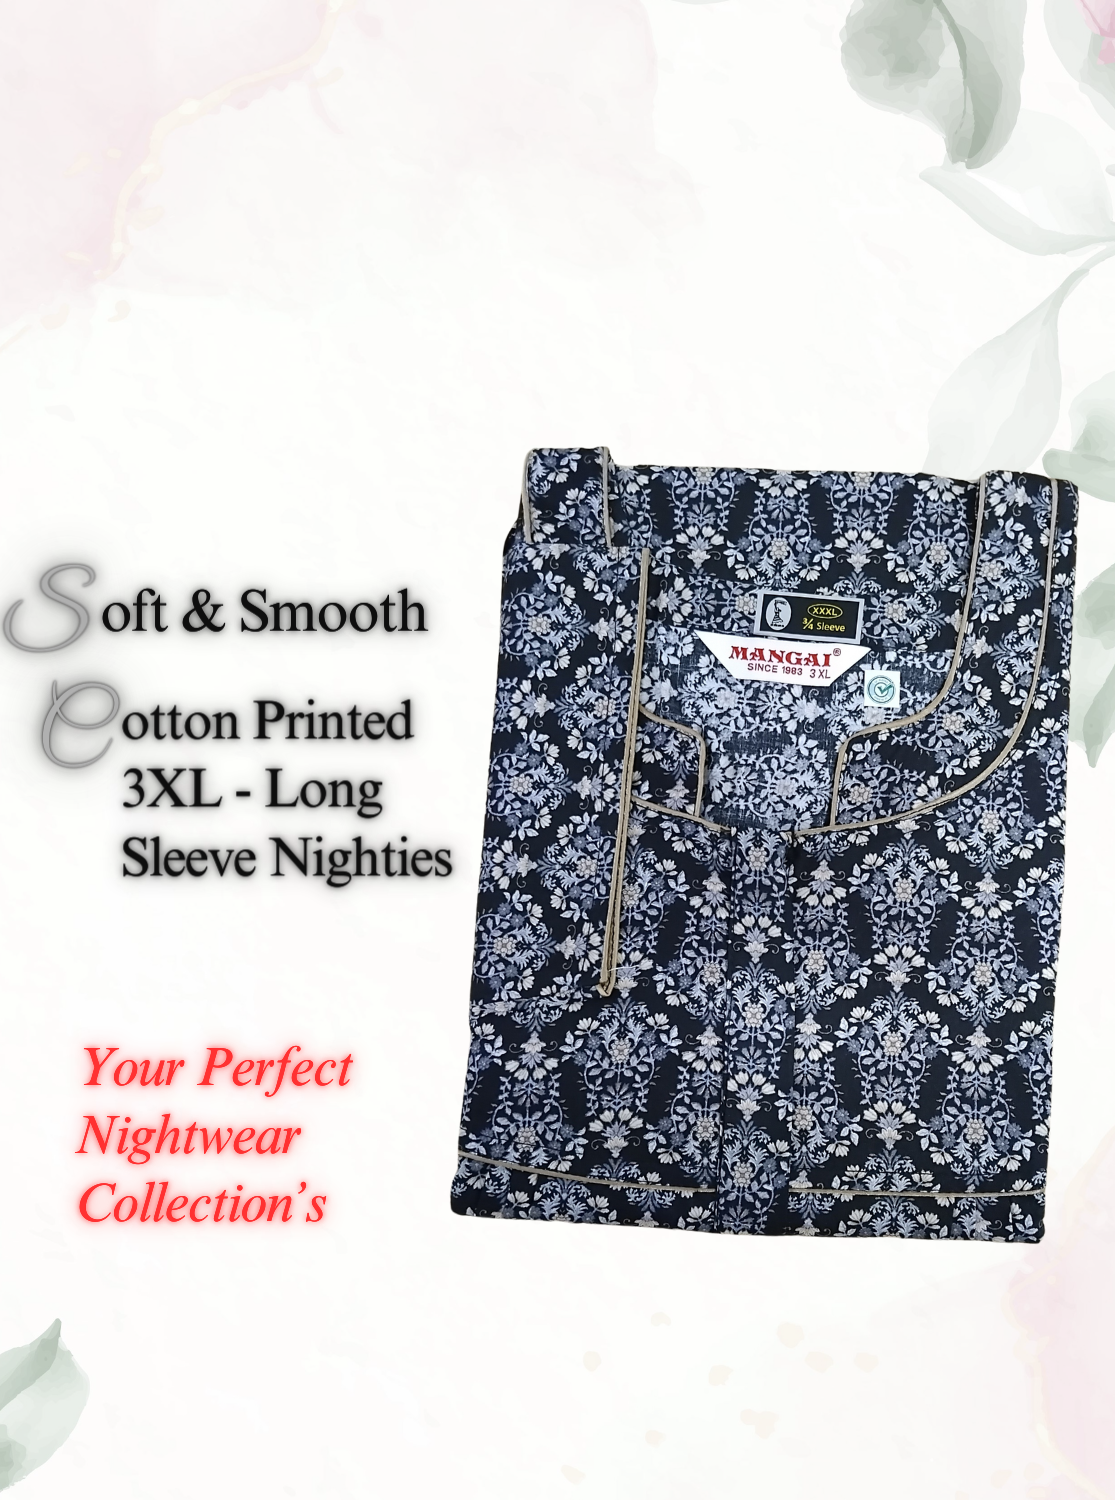 MANGAI Premium Cotton Printed Regular Comfort Long Sleeve Model 3XL Size Nighties - Fancy Neck | With Side Pocket |Shrinkage Free Nighties | Trendy Collection's for Stylish Women's